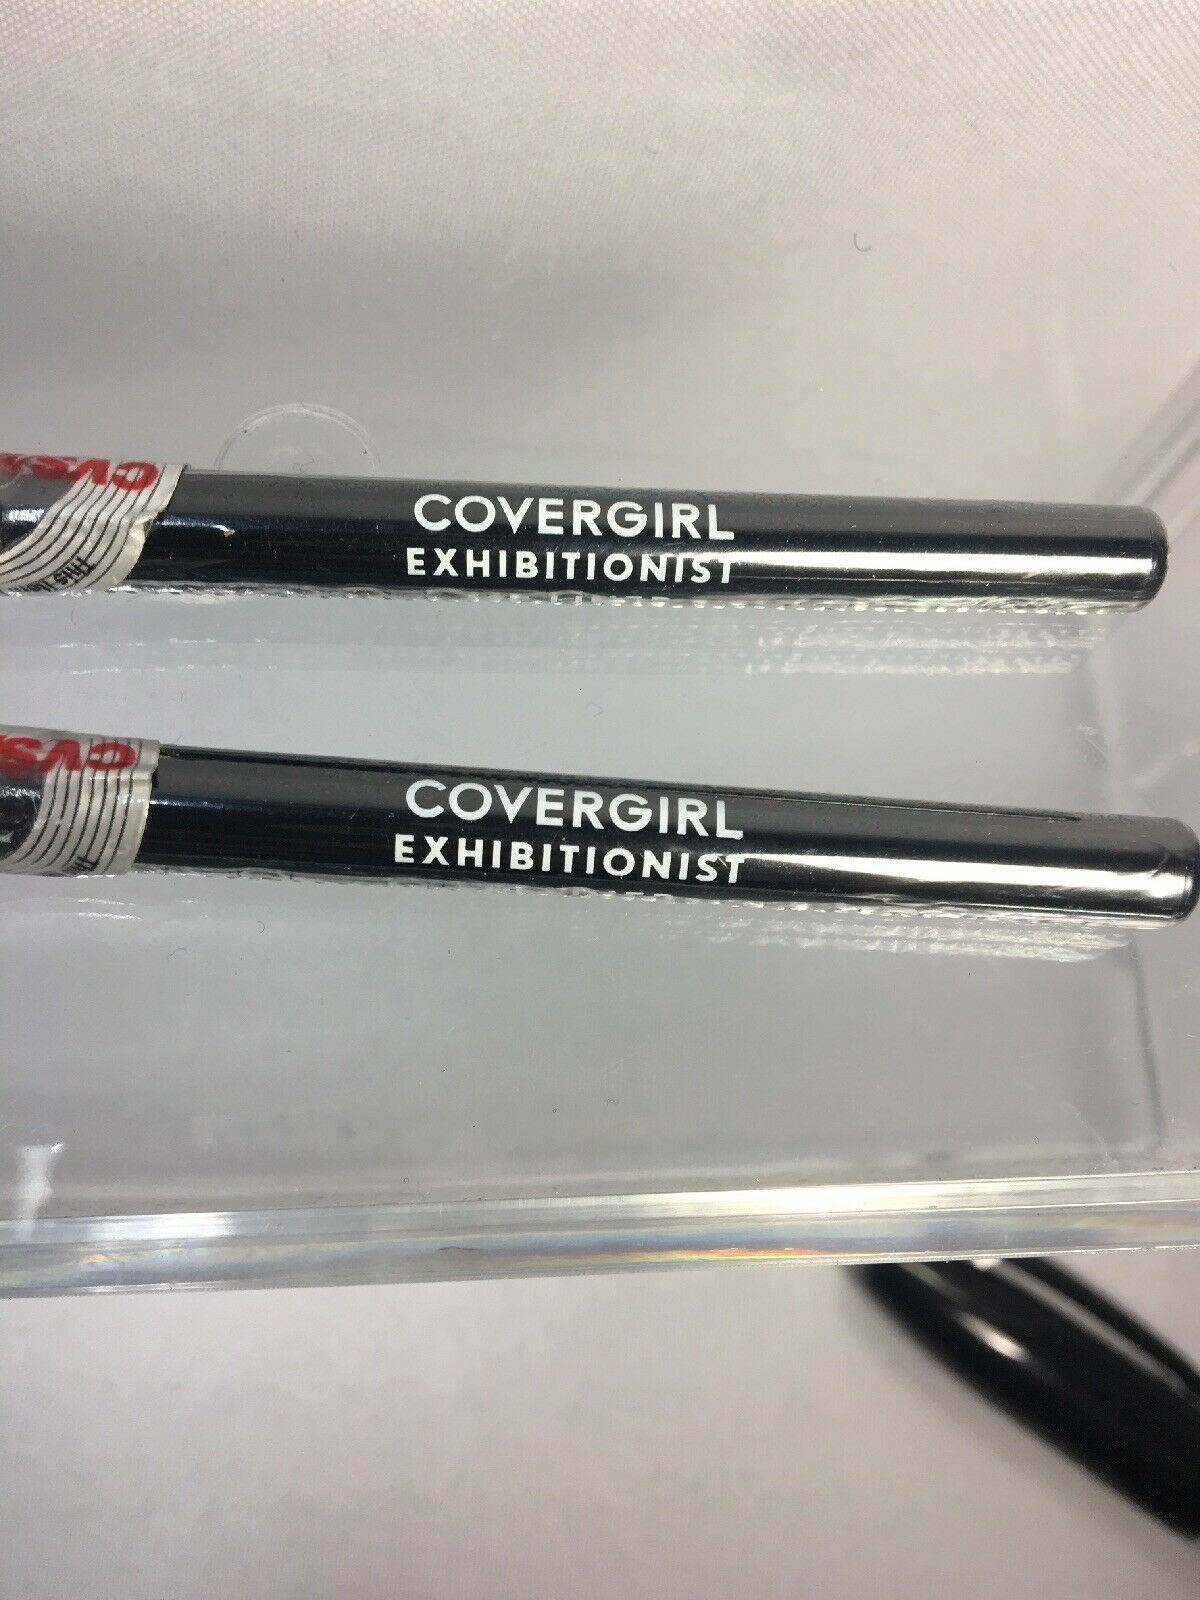 (2) CoverGirl Outlast Exhibitionist Lip Liners 220 Cherry Red - $3.79